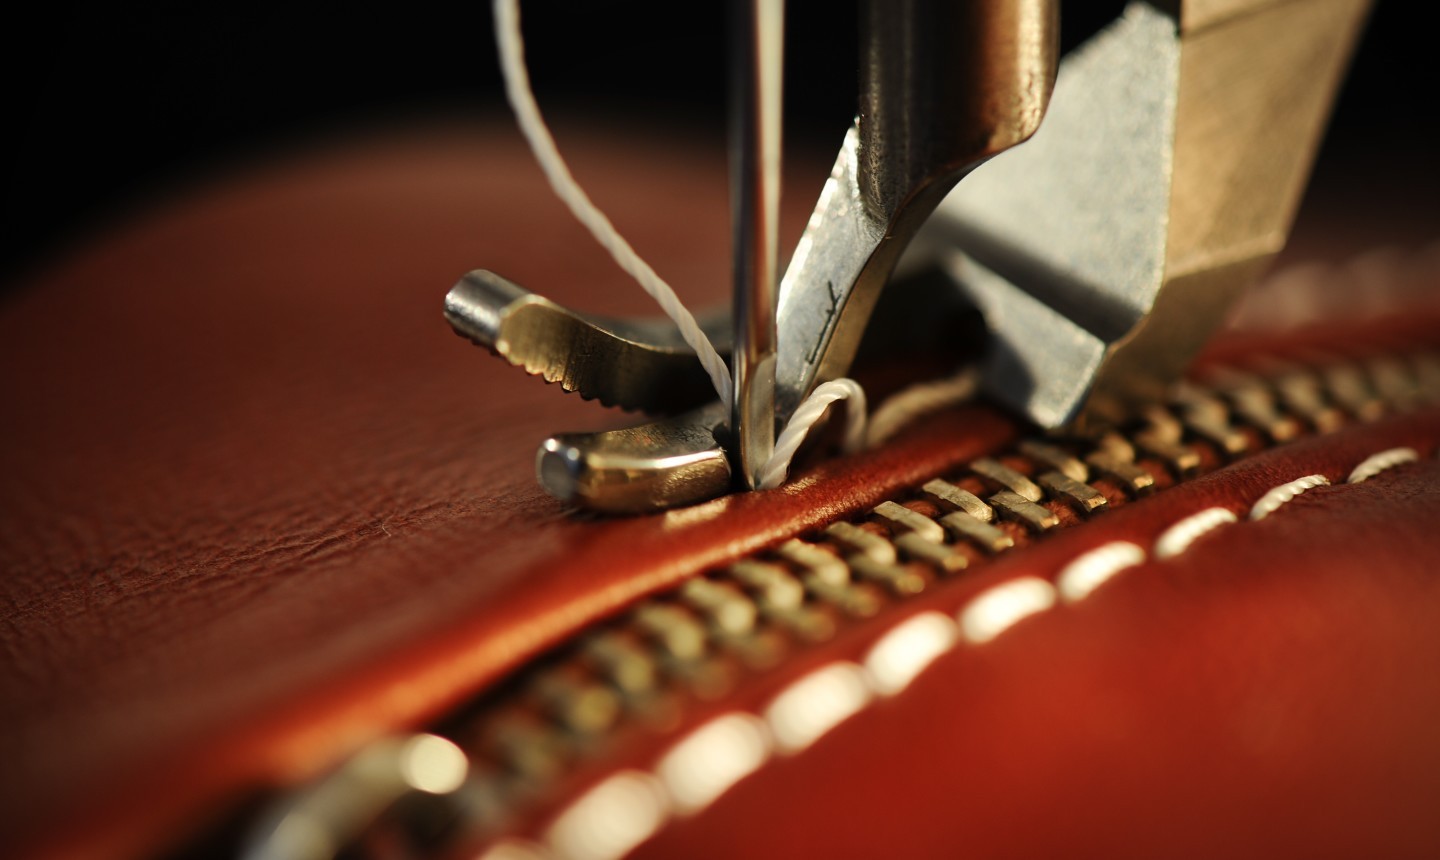 Sewing Leather with Standard Sewing Machines